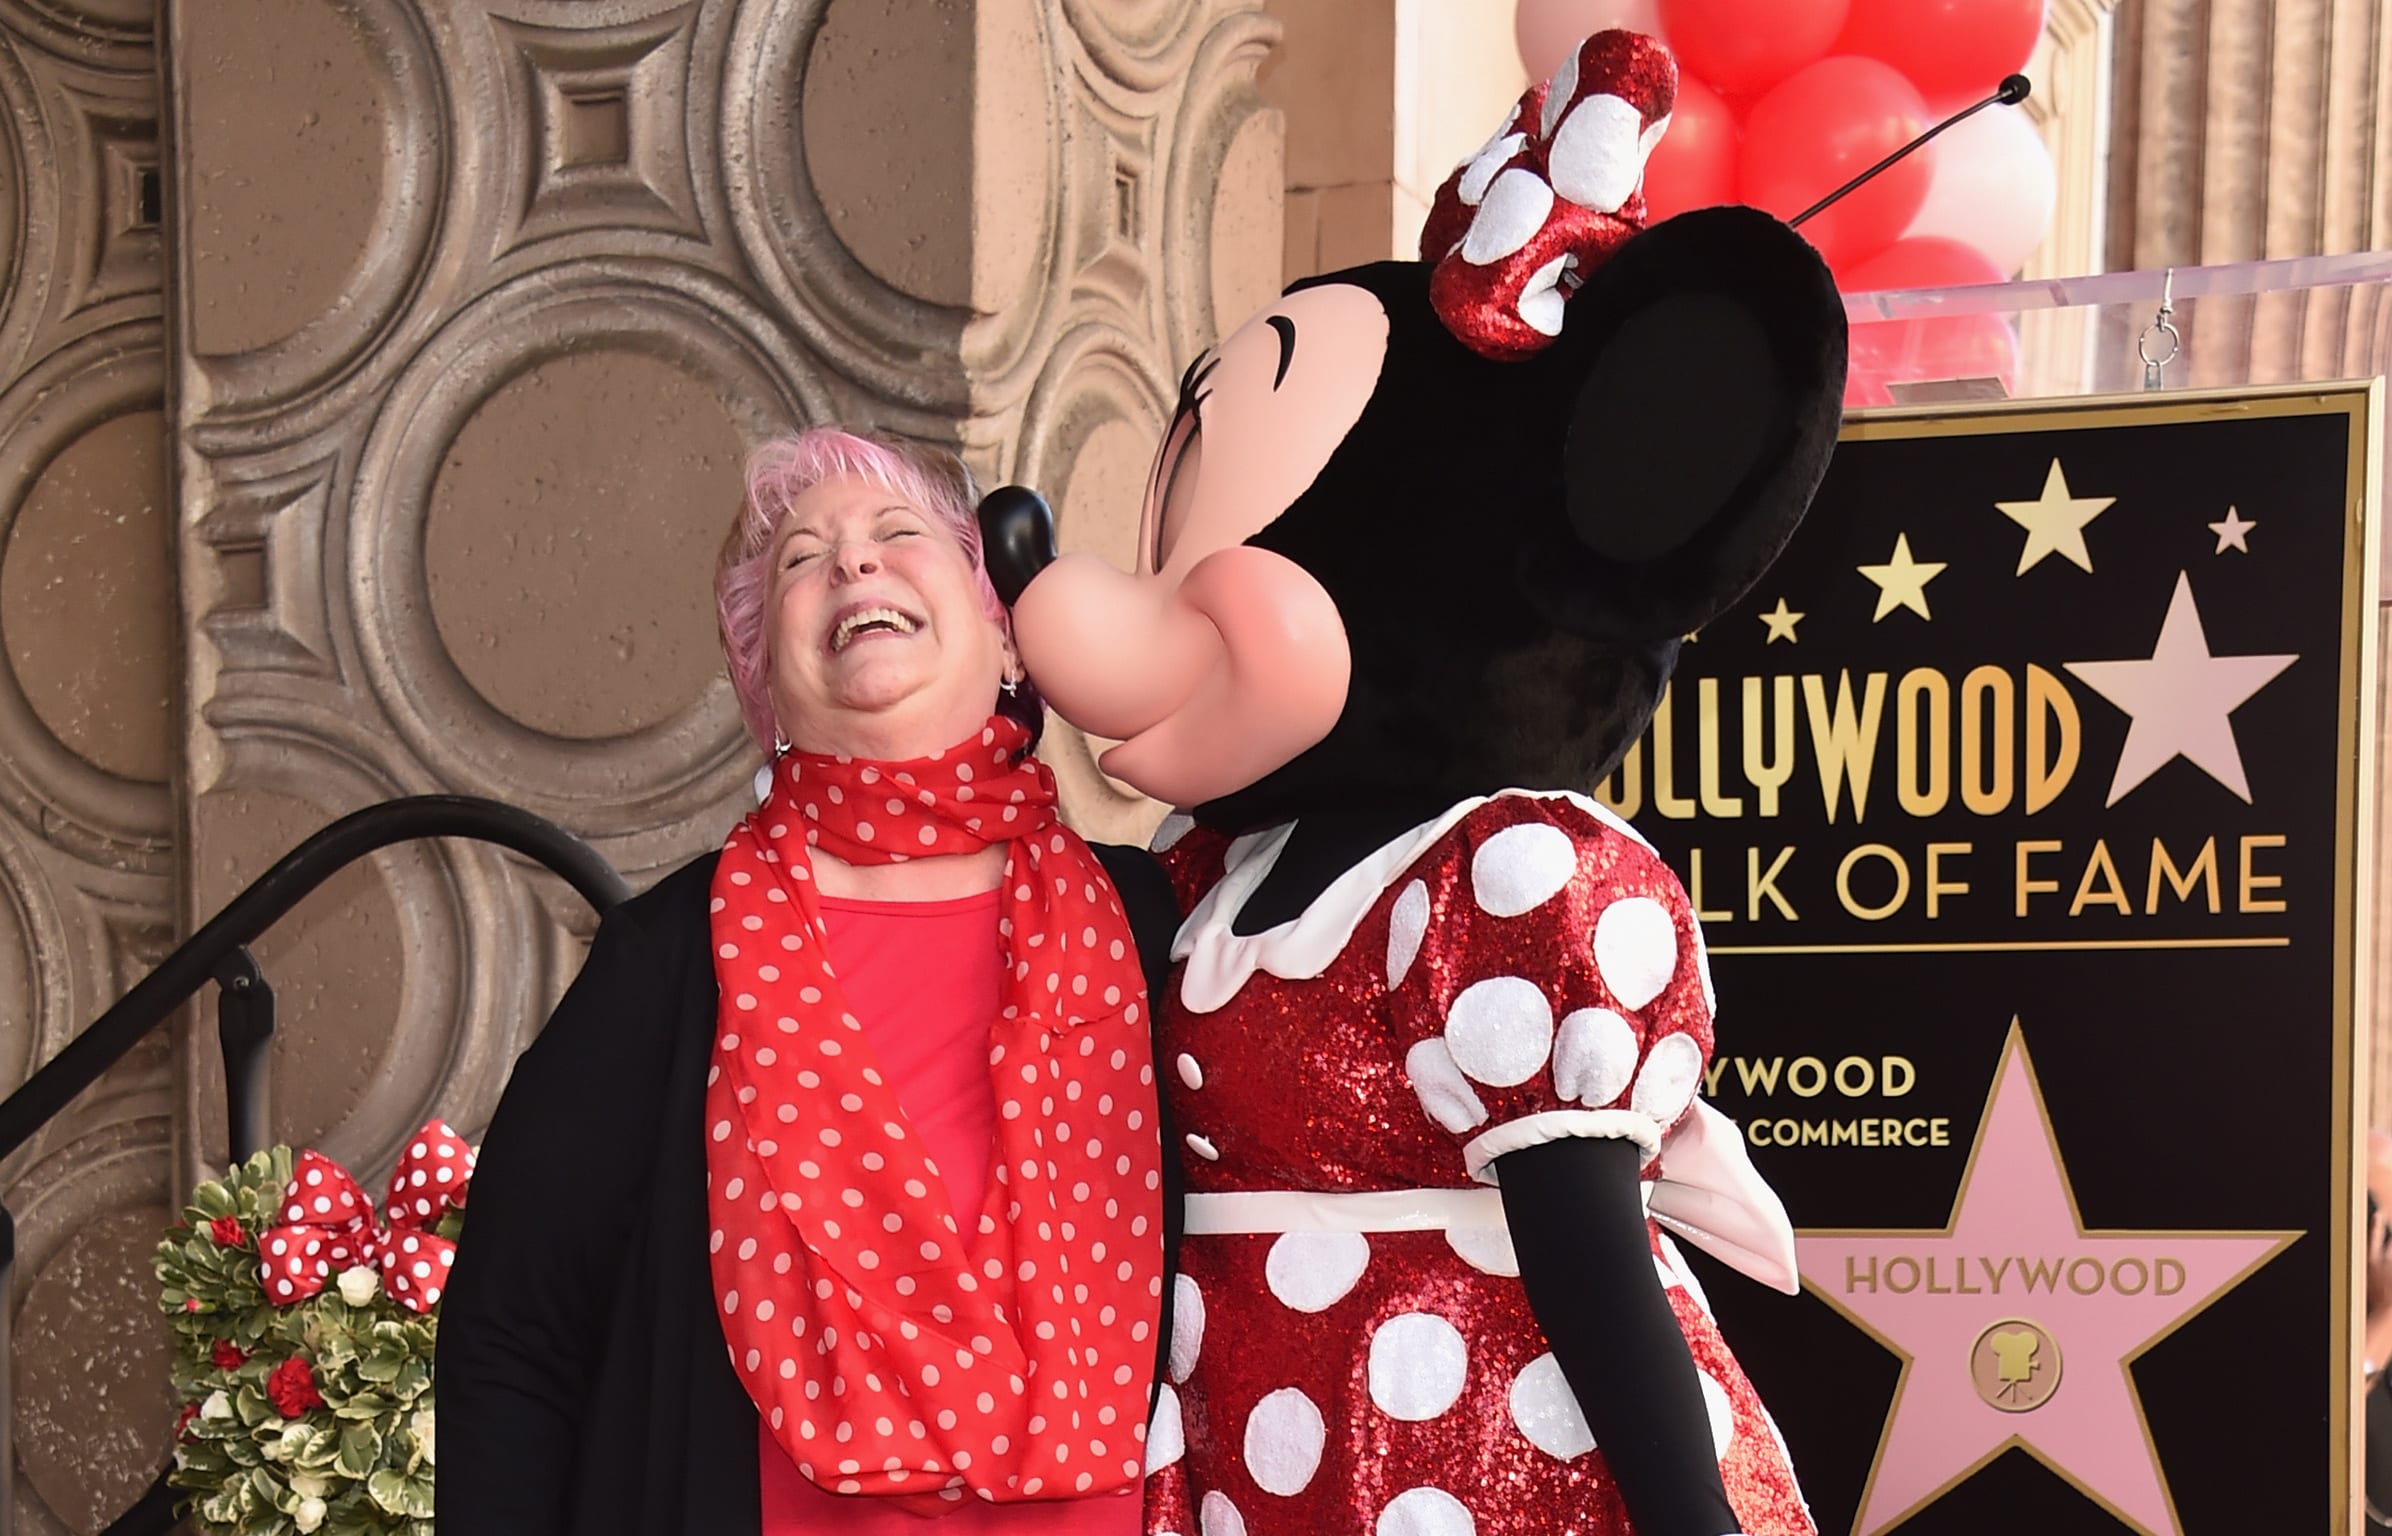 Voice actress Russi Taylor, who has voiced Minnie Mouse since 1986, has died.